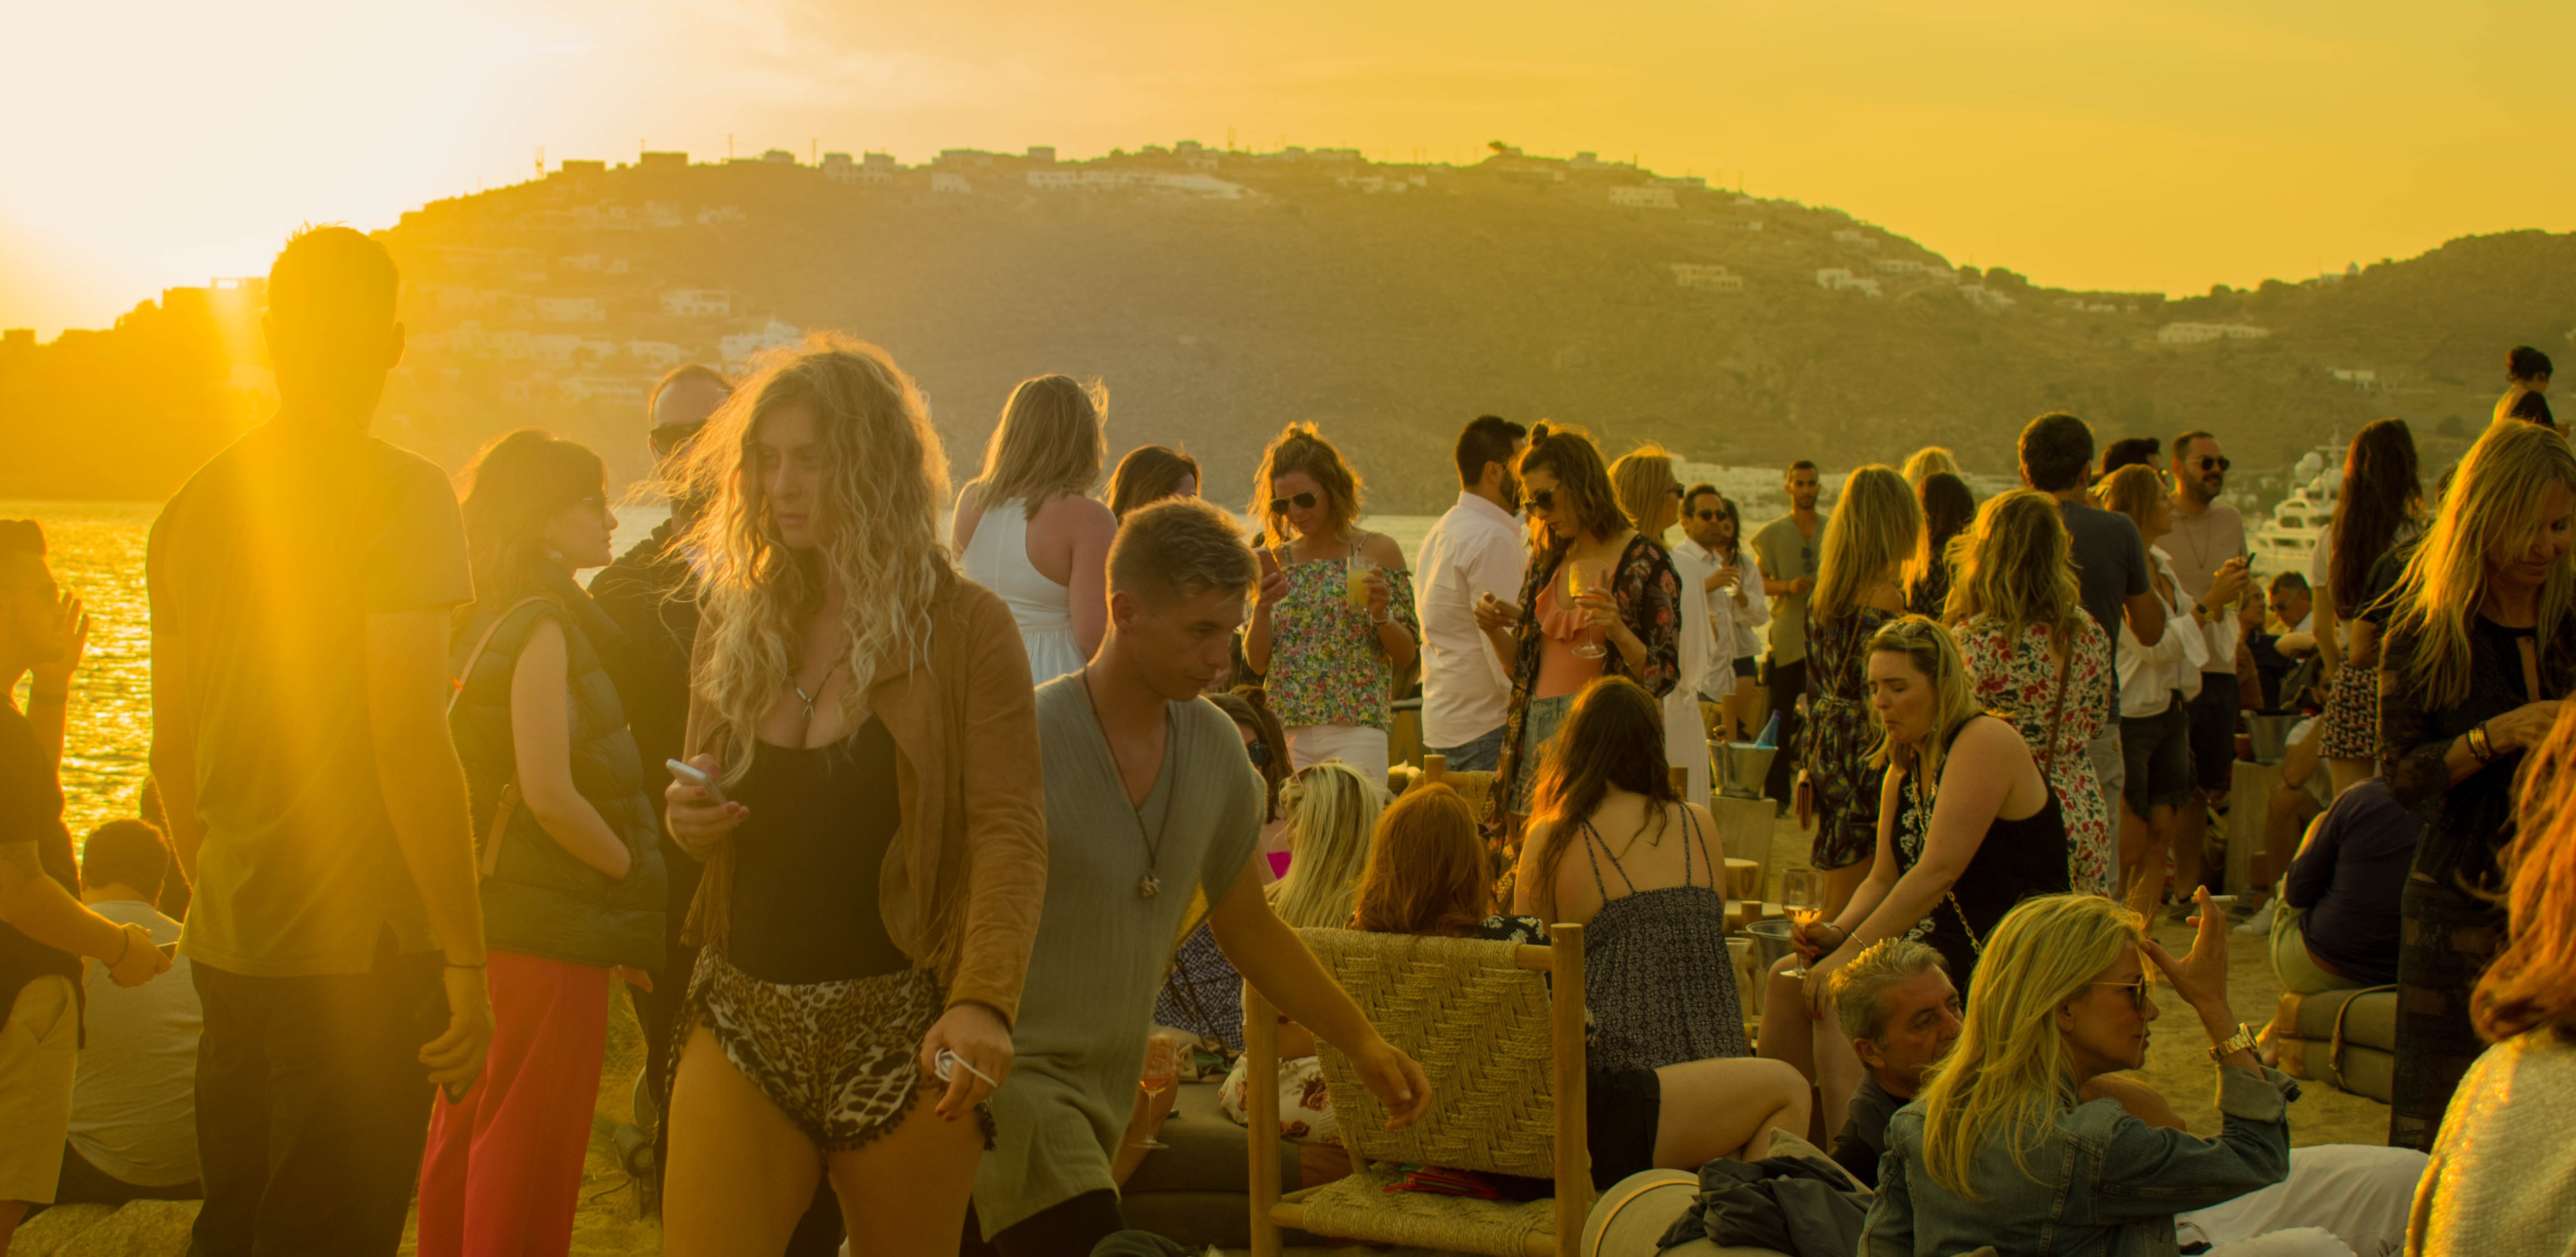 Crowd of people gathering during a sunset